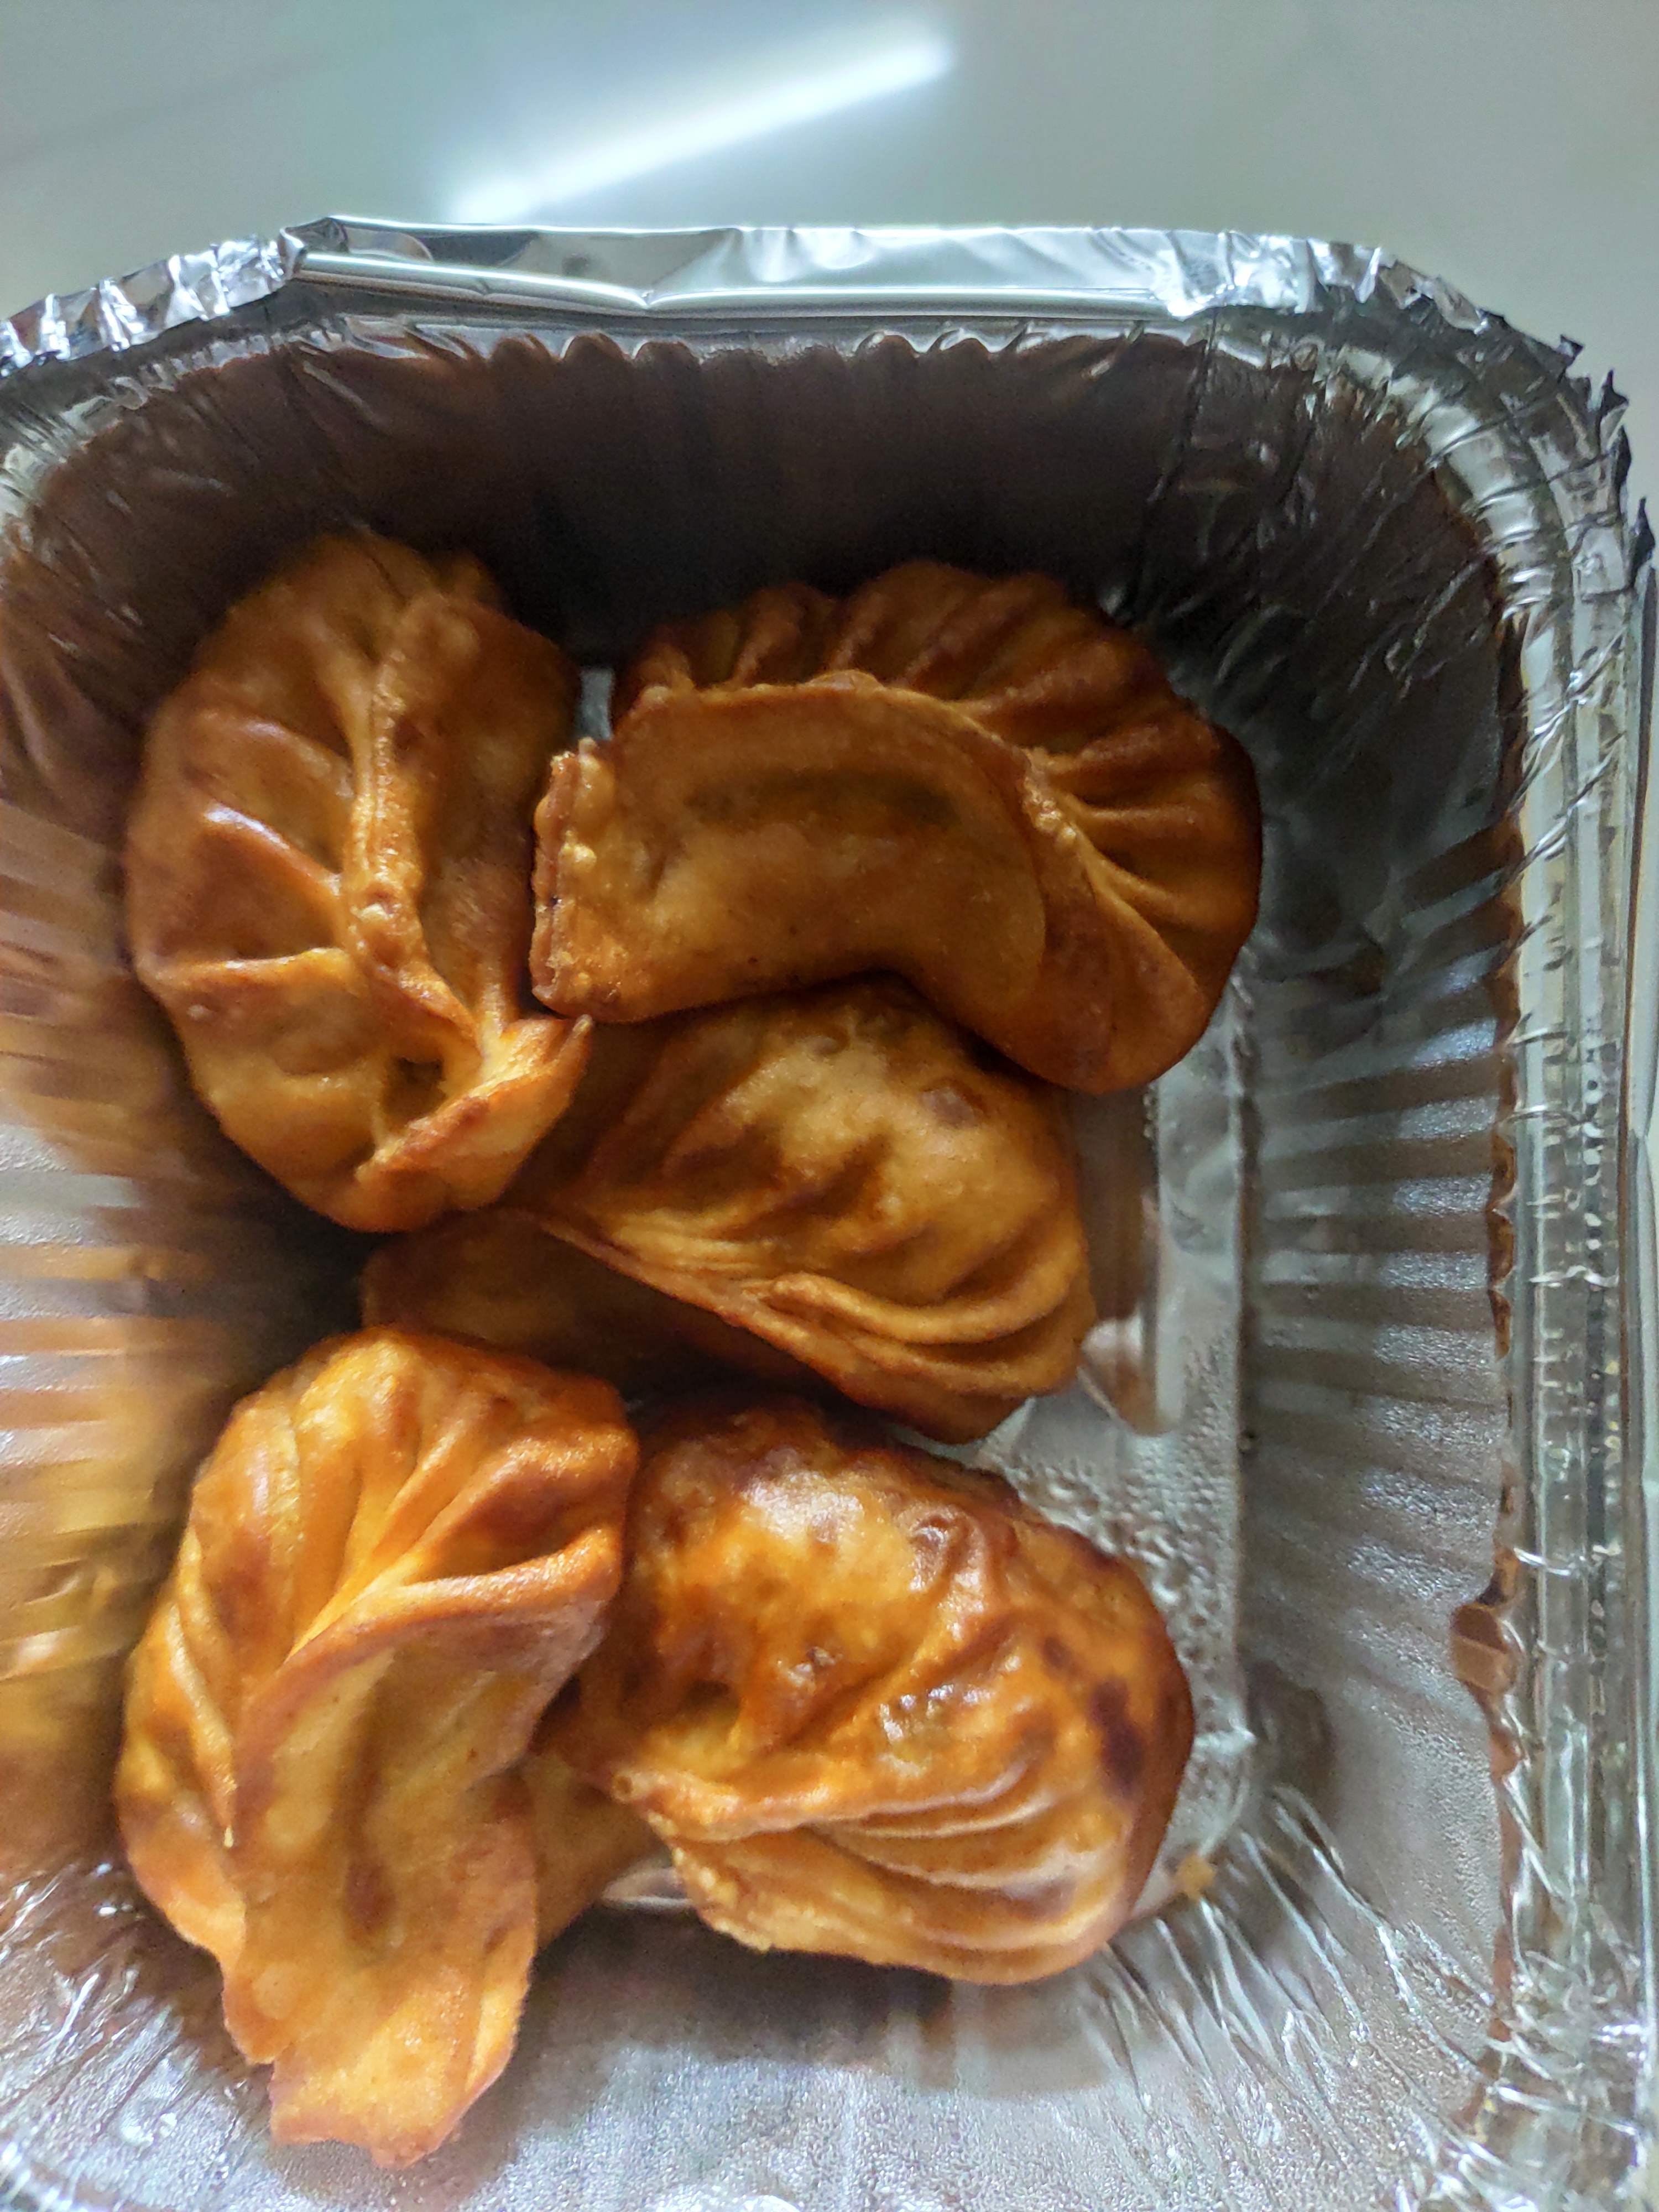 Food,Dish,Cuisine,Curry puff,Ingredient,Pastizz,Baked goods,Sfogliatelle,Pastry,Produce